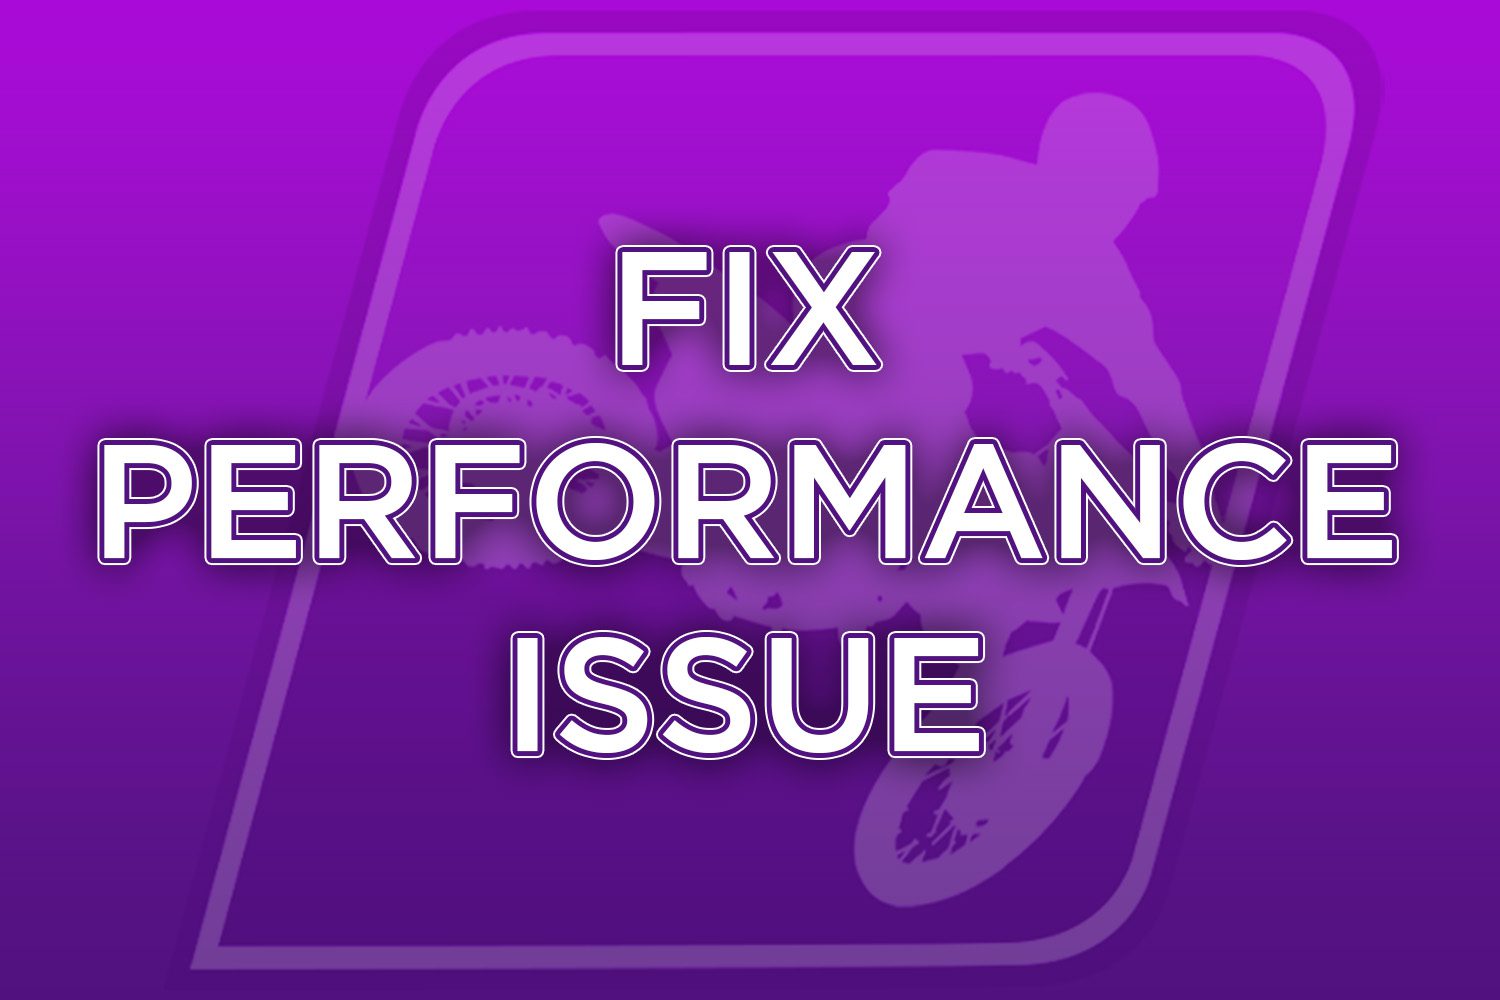 How to fix bad performance issue?